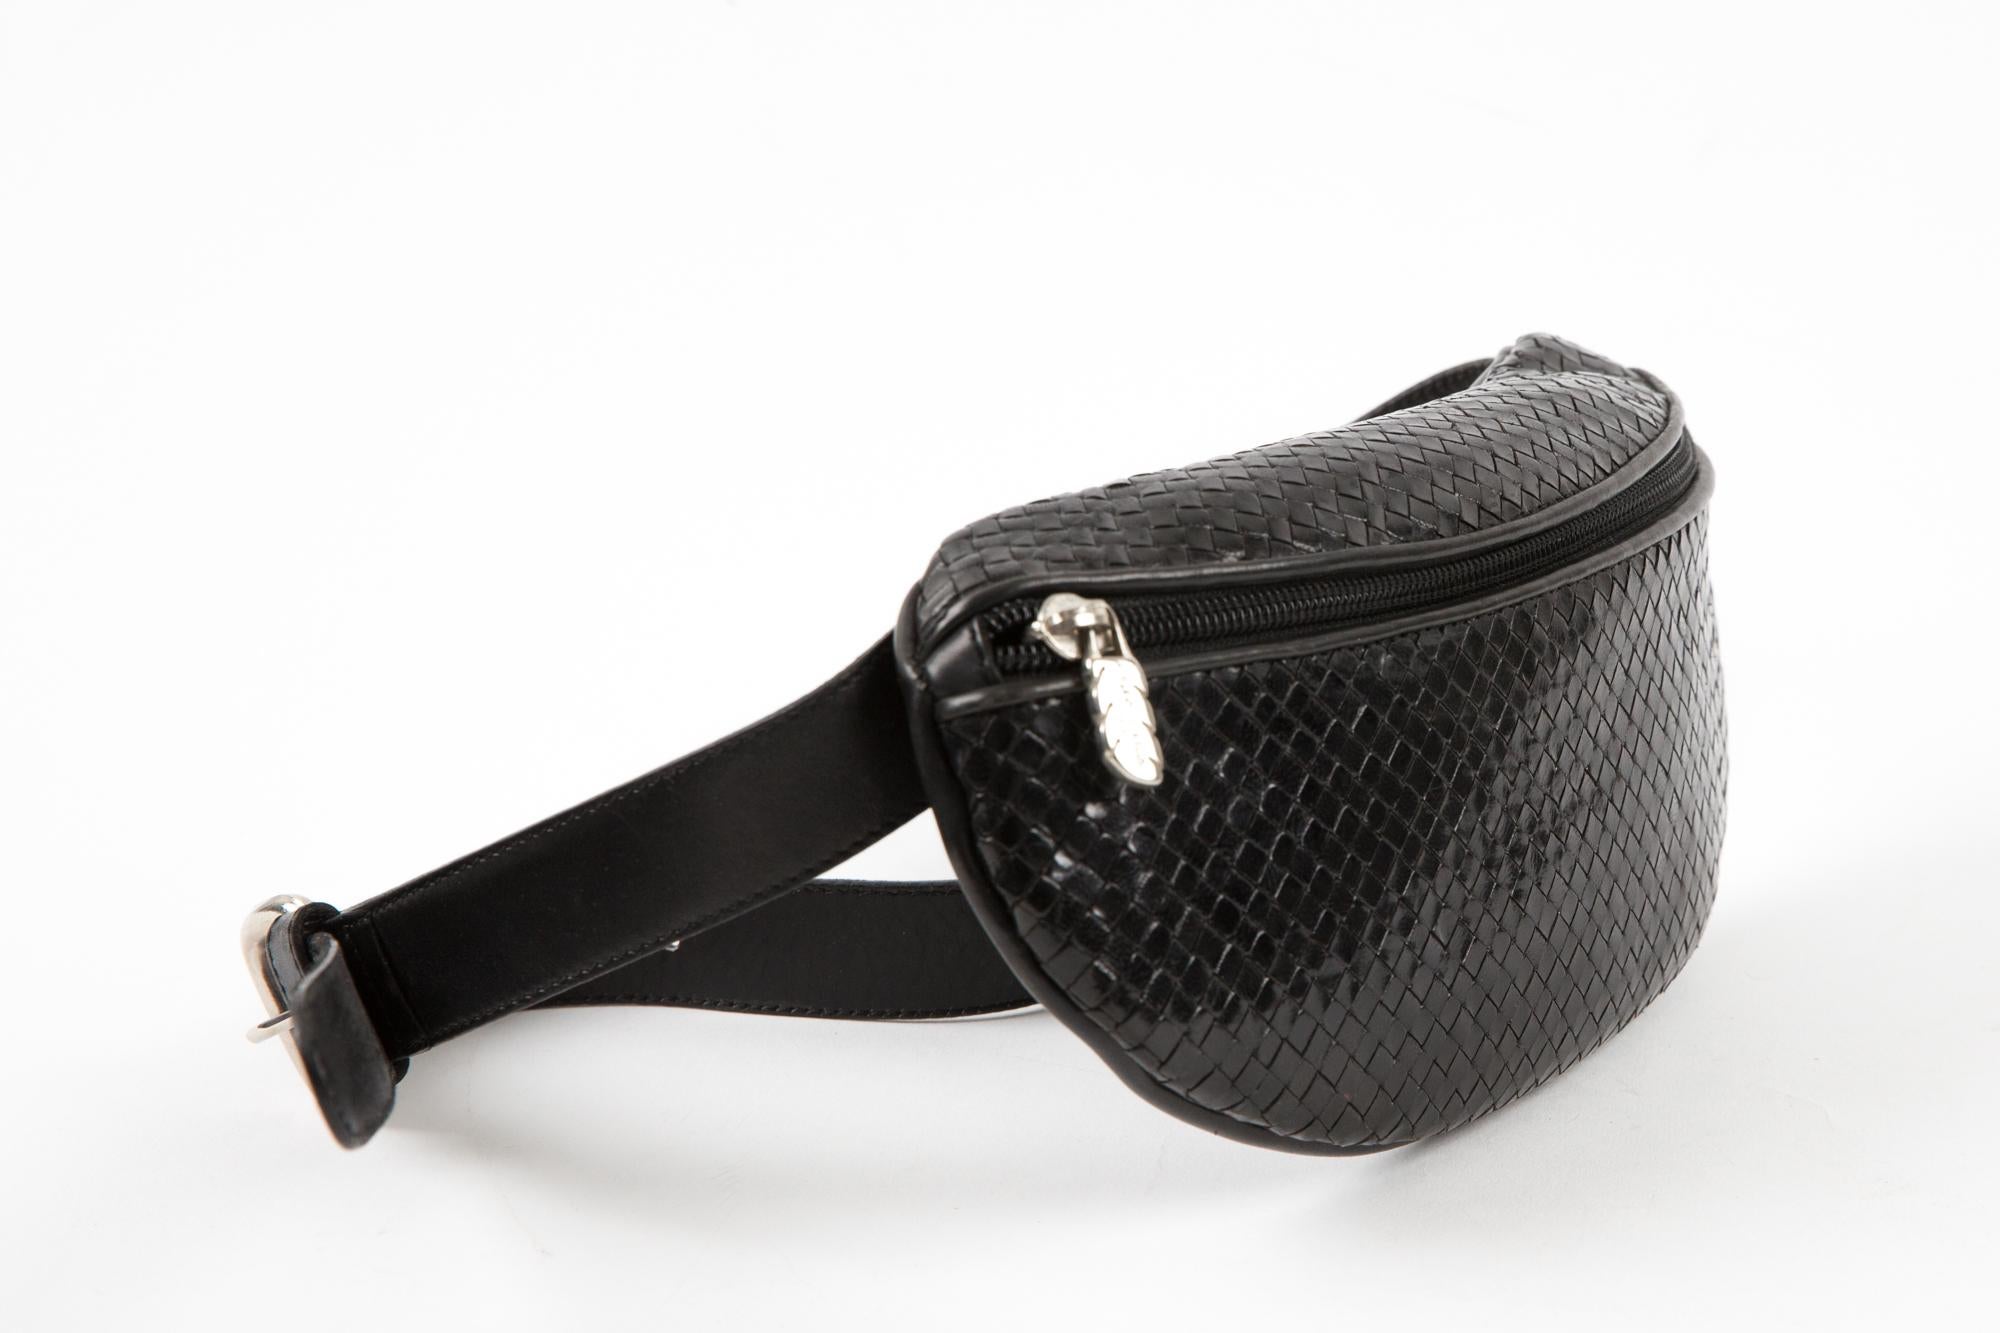 Stephane Kelian black black leather woven belt bag featuring an adjustable belt strap (maxi length belt: 35.8in. (91cm), a front top zip with a logo silver-tone zip puller.
Length including belt buckle: 35.8in. (91cm)
Bab part length: 10.6in